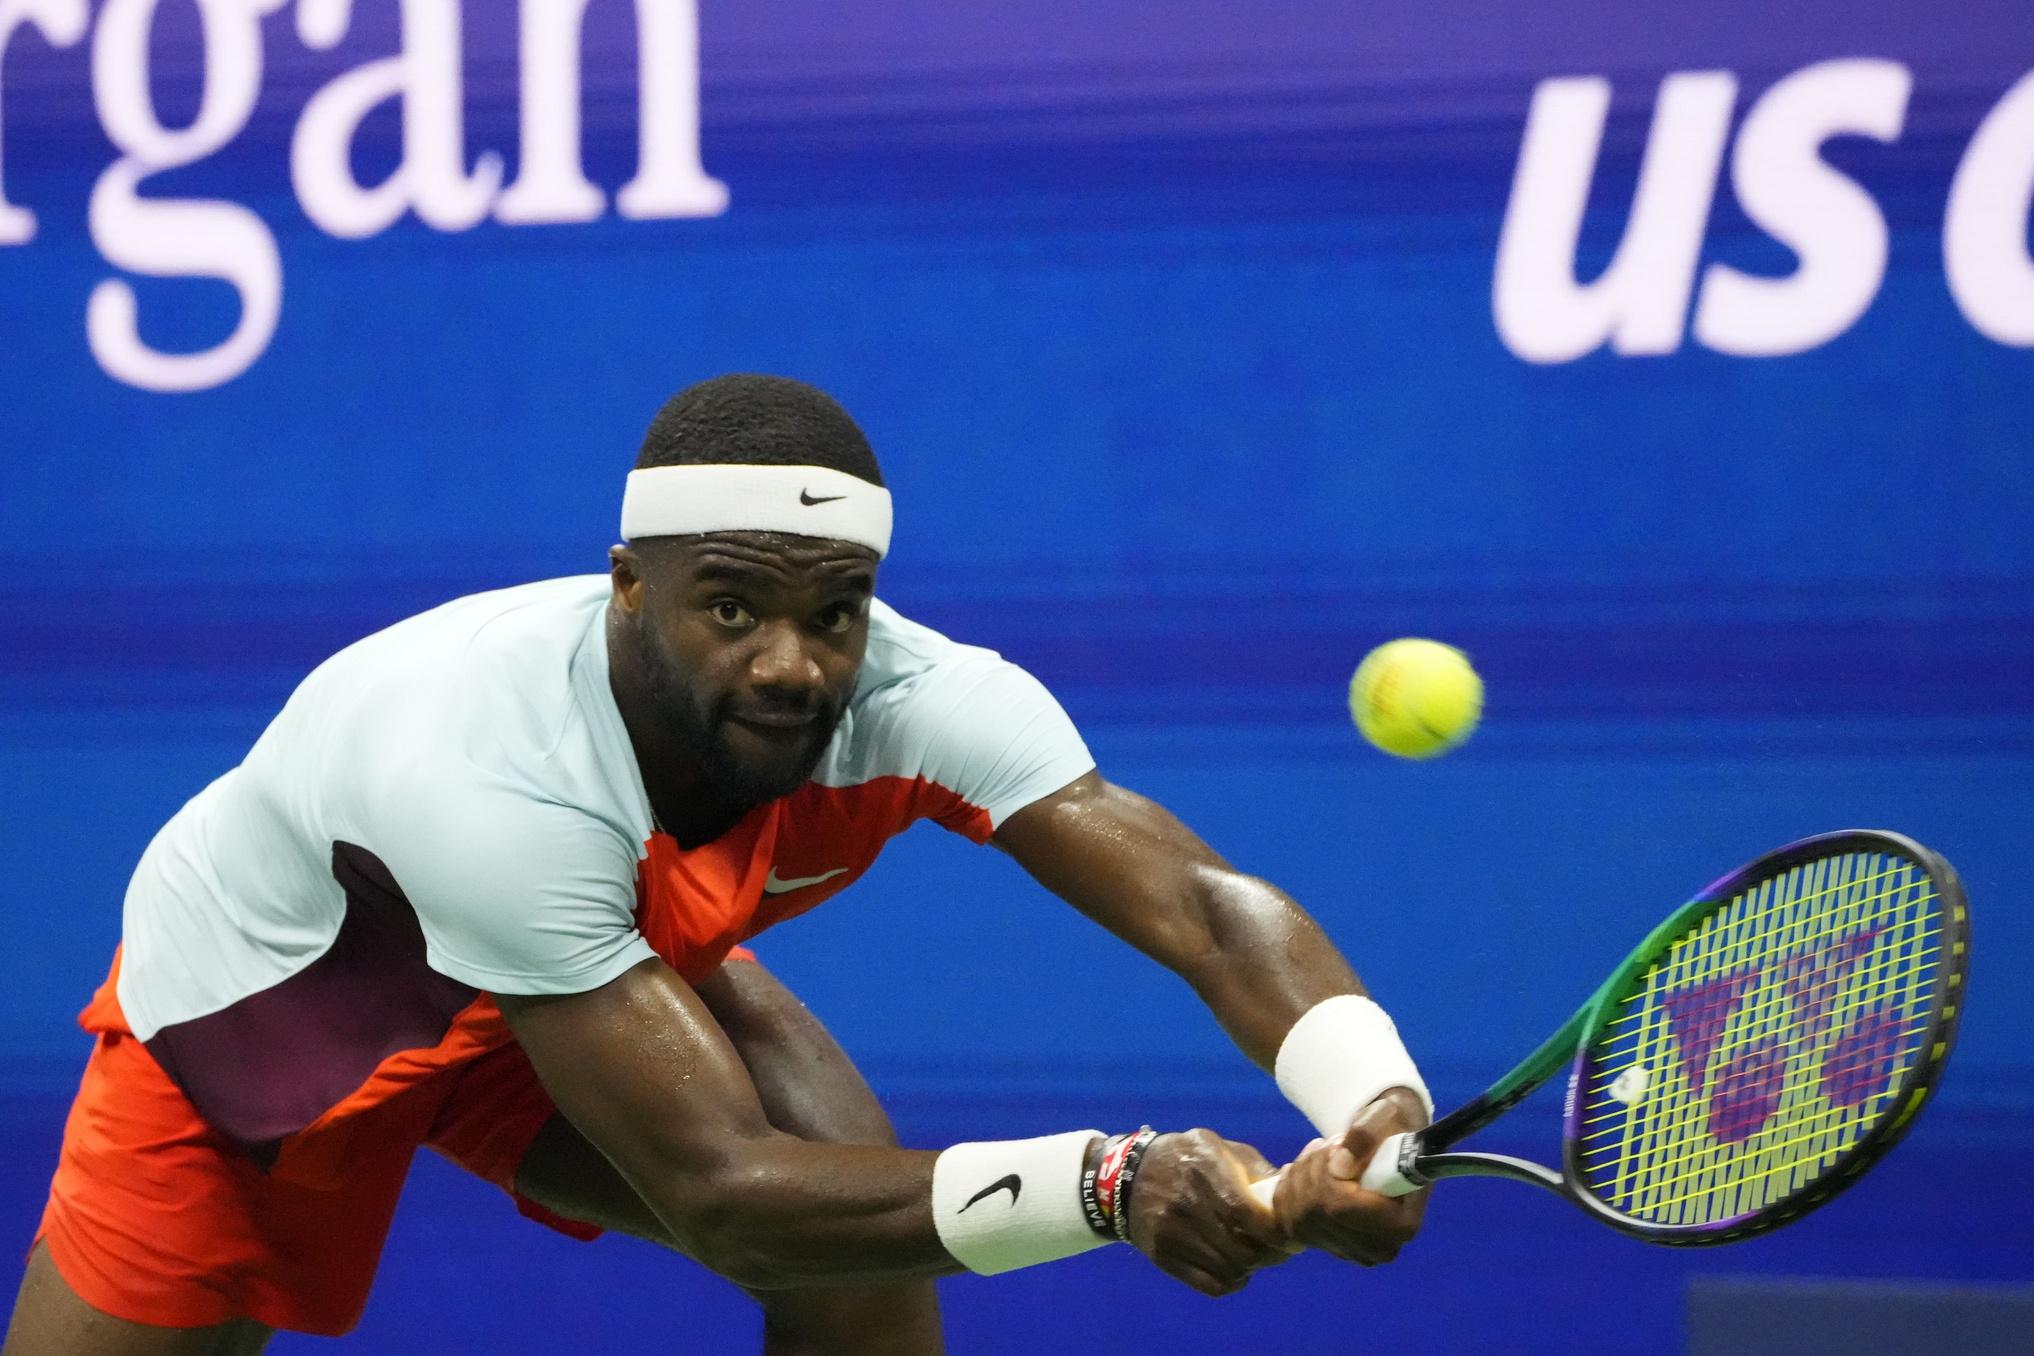 Frances Tiafoe (USA) reaches for a backhand against Carlos Alcaraz (ESP) (not pictured) in a men's singles semifinal on day twelve of the 2022 U.S. Open tennis tournament at USTA Billie Jean King Tennis Center. / Robert Deutsch-USA TODAY Sports